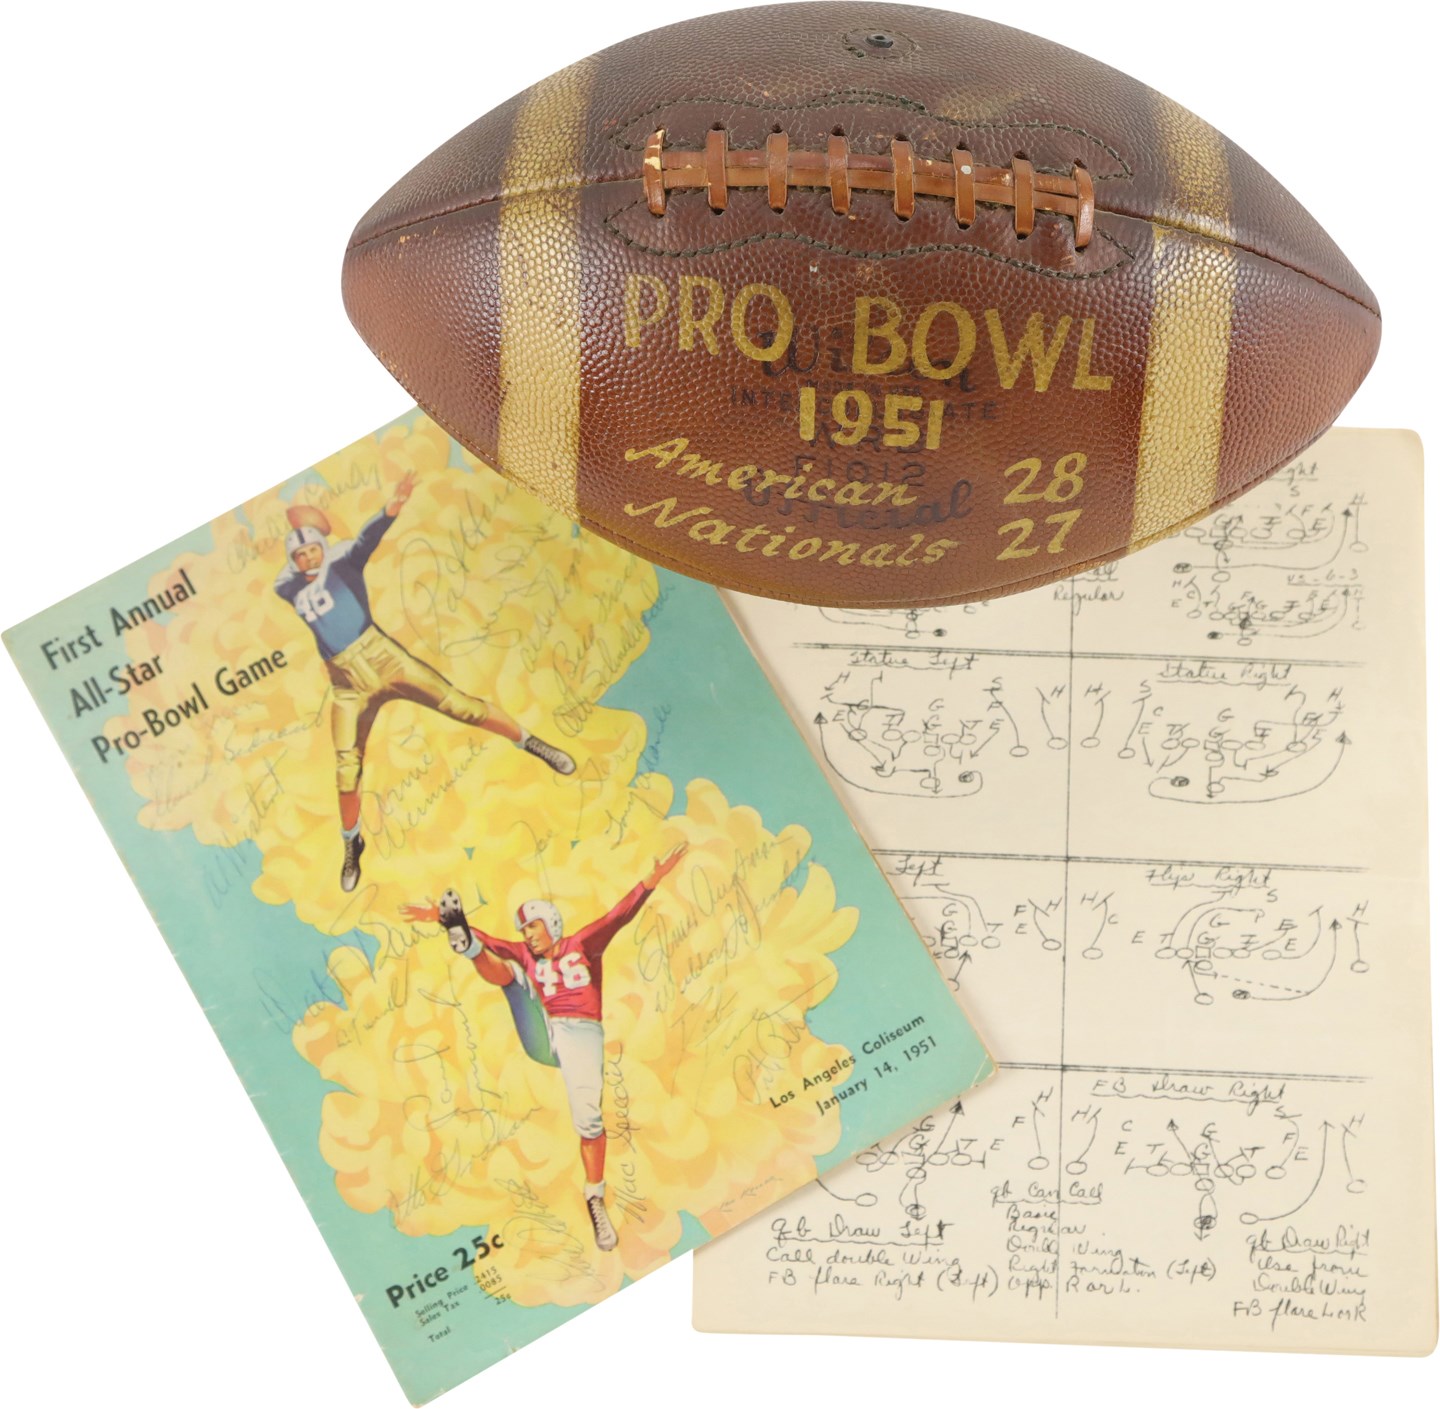 The Mac Speedie Football Collection - Inaugural 1951 NFL Pro Bowl Game Ball, Signed Program, and Mac Speedie's Personal Playbook - Mac Speedie Collection